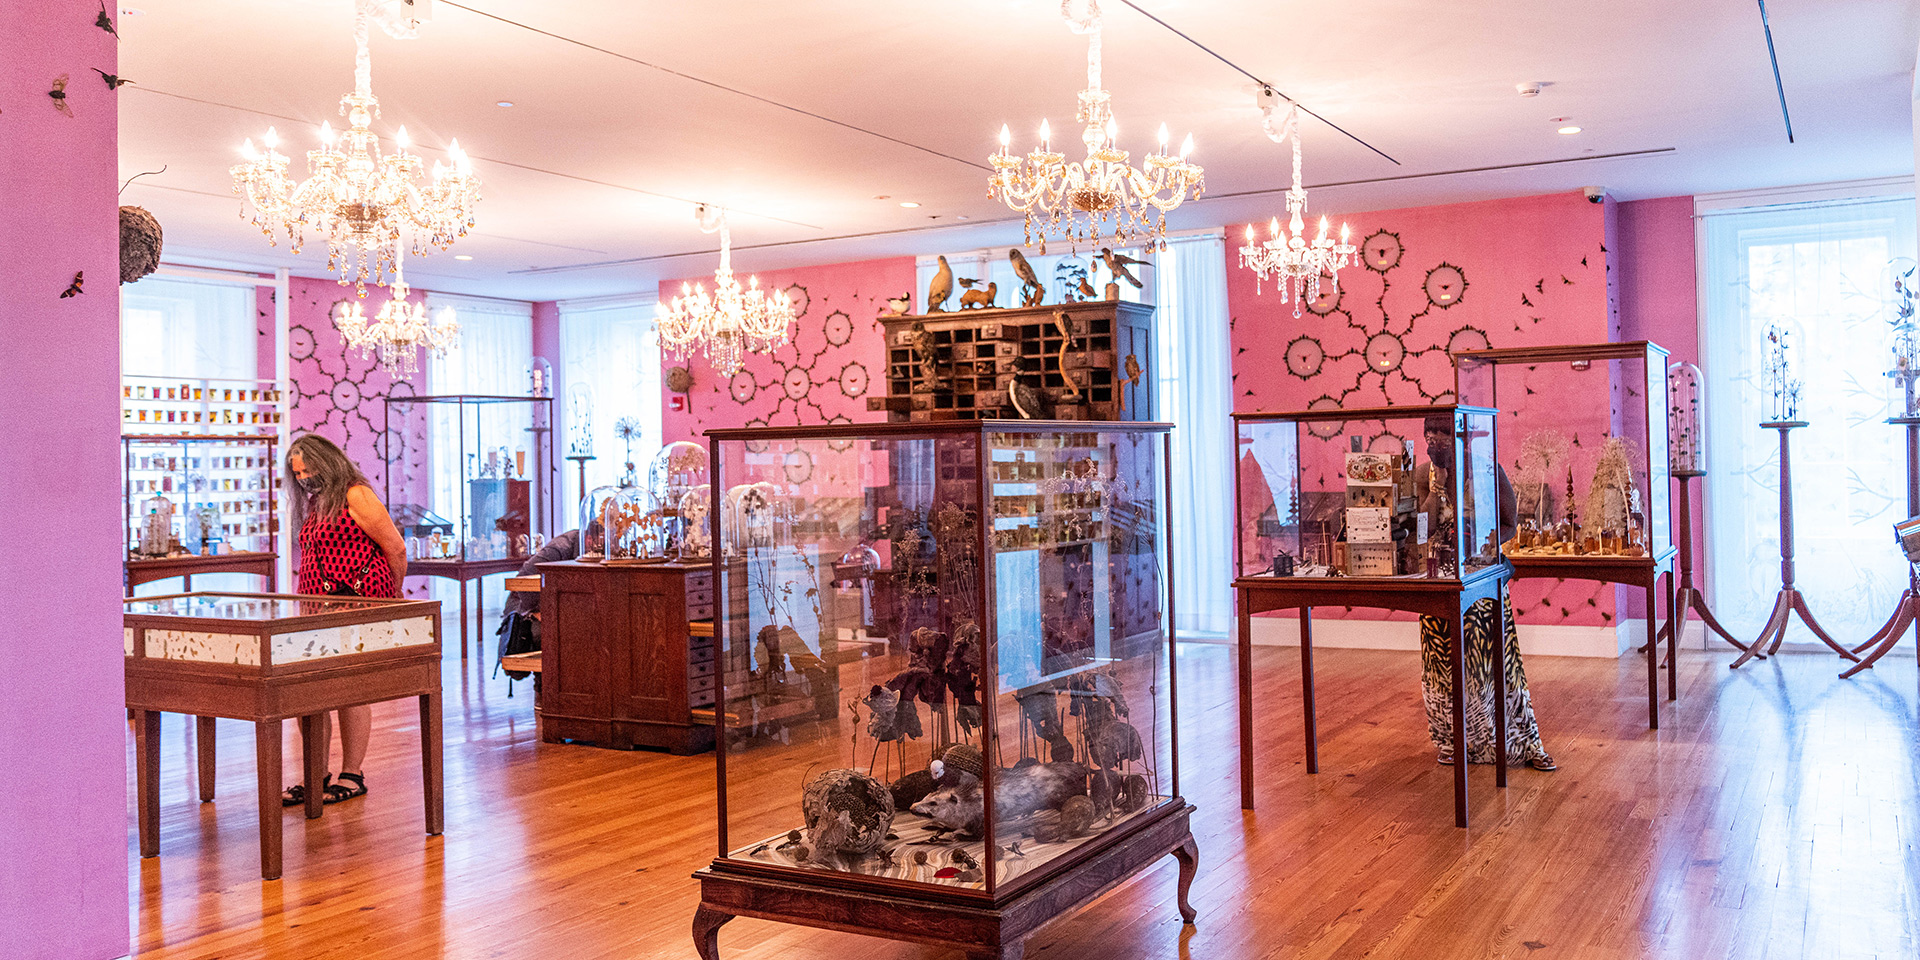 Gallery view of Magicicada exhibition, pink walls with crystal chandeliers and glass cases in the room